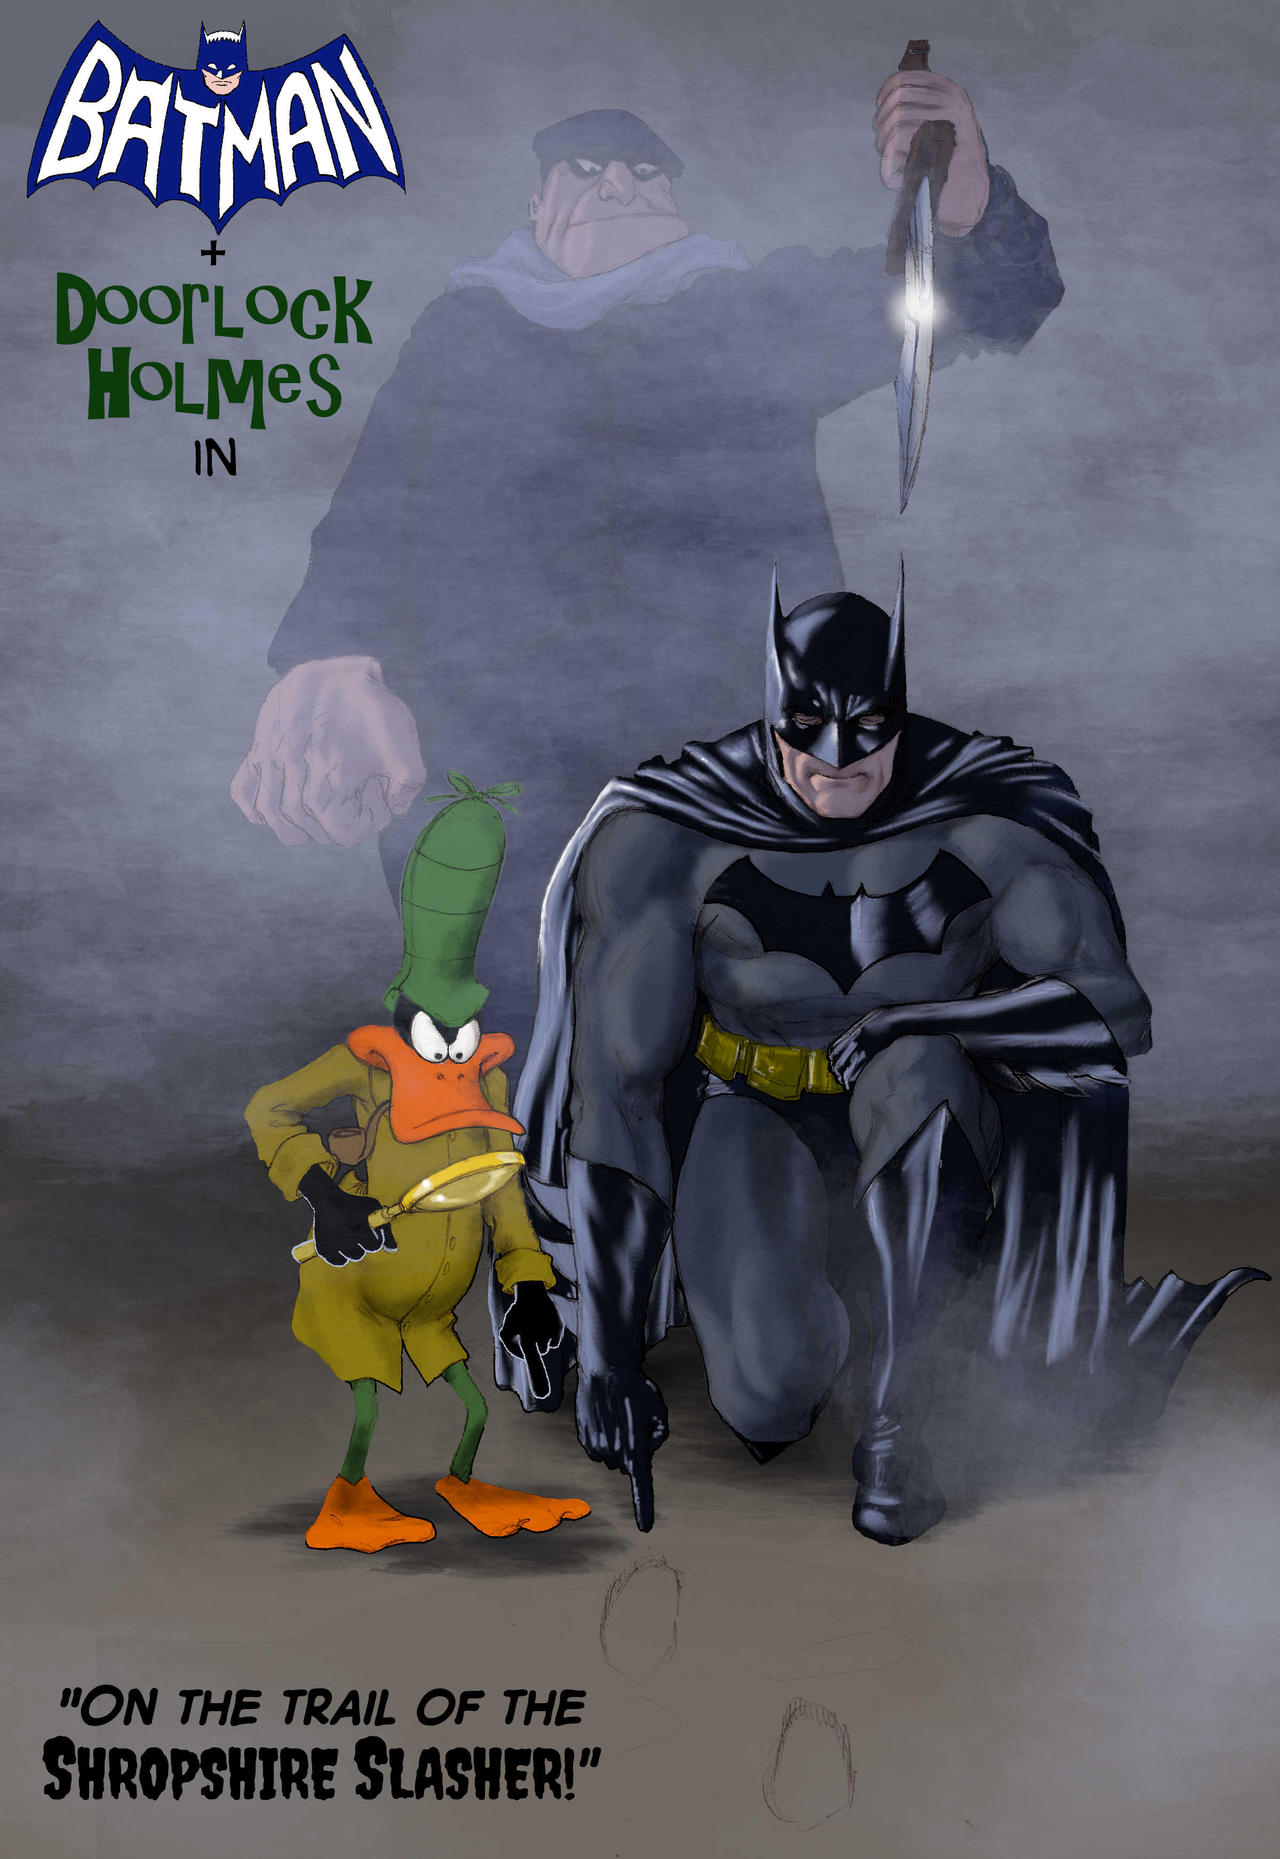 TLIID goes Looney Tunes - Batman and Daffy Duck by Nick-Perks on DeviantArt